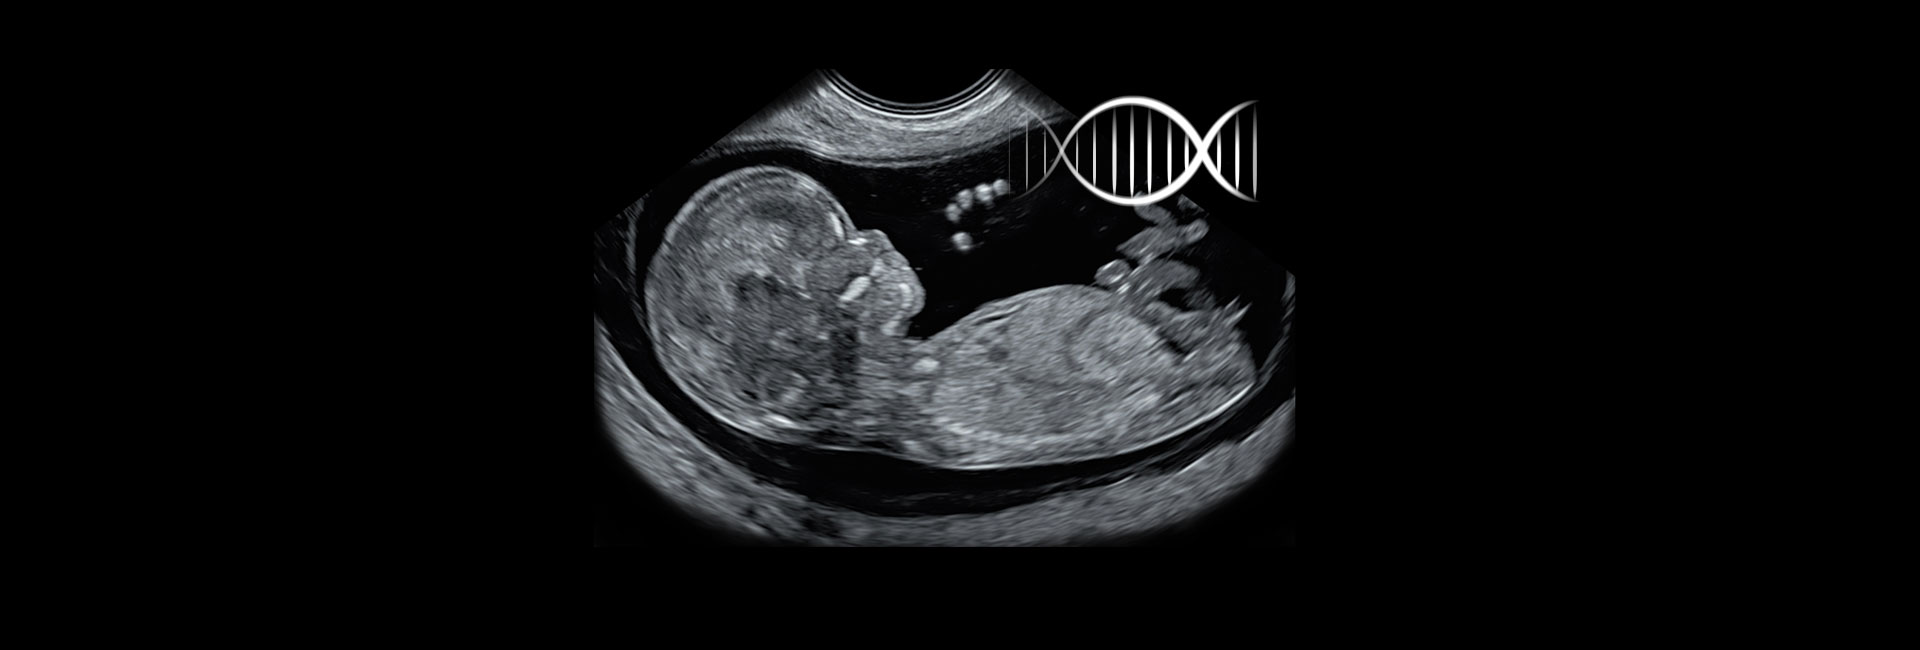 Early Fetal Test at 12 Weeks – recording